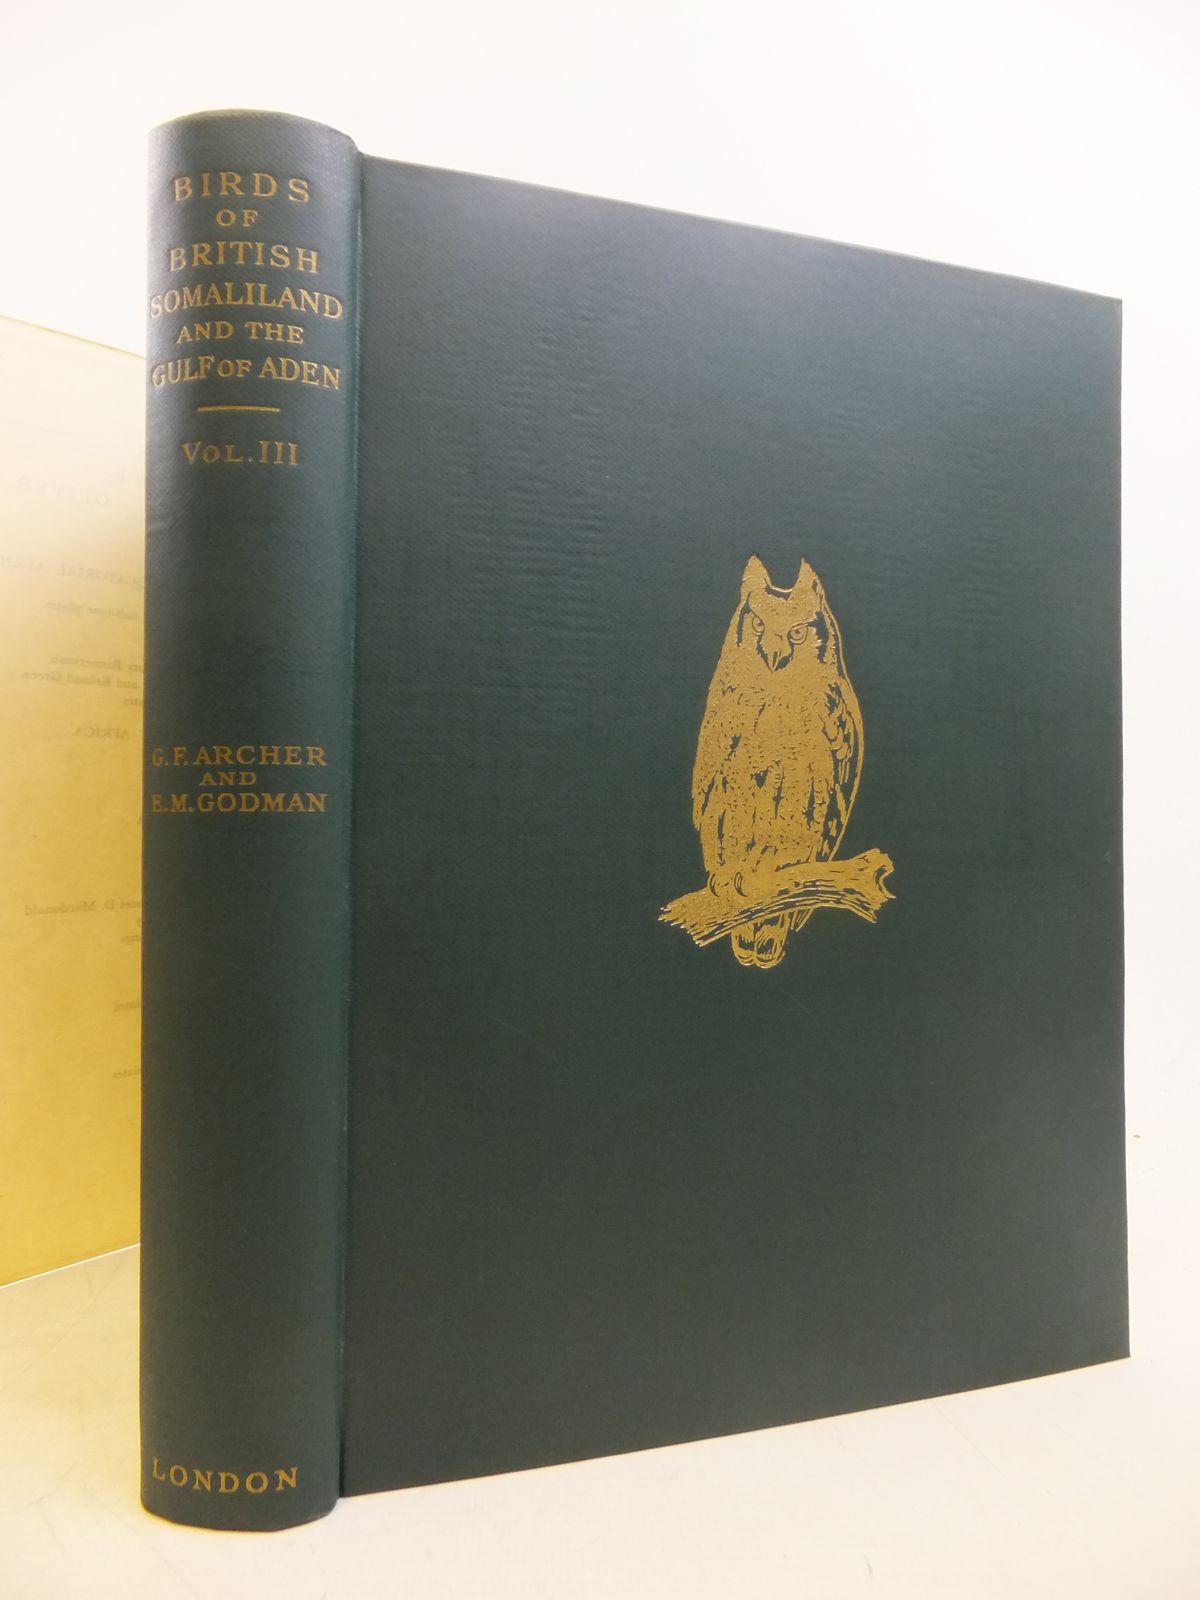 Photo of THE BIRDS OF BRITISH SOMALILAND AND THE GULF OF ADEN VOLUME III written by Archer, Geoffrey
Godman, Eva M. illustrated by Thorburn, Archibald
Gronvold, Henrik published by Oliver & Boyd (STOCK CODE: 1811162)  for sale by Stella & Rose's Books